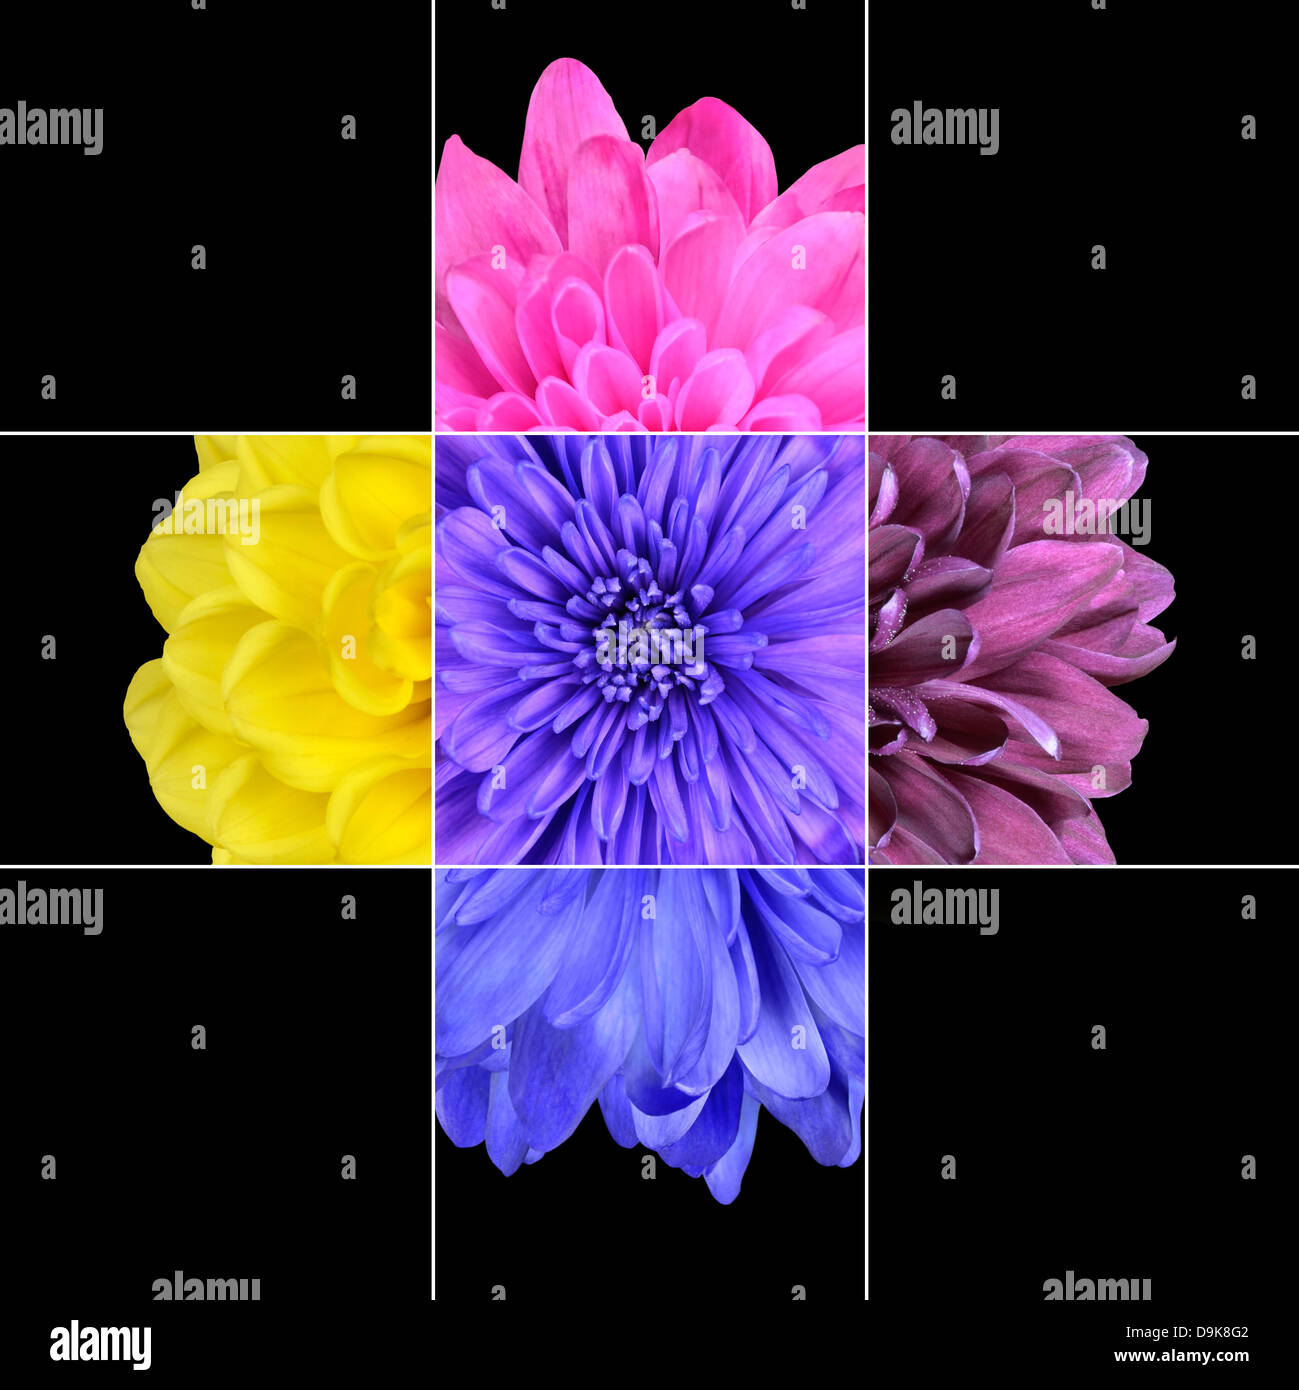 Colorful Chrysanthemum Flower mosaic design which is consisting of 9 squares on 3x3 grid with parts of chrysanthemum flower. Stock Photo